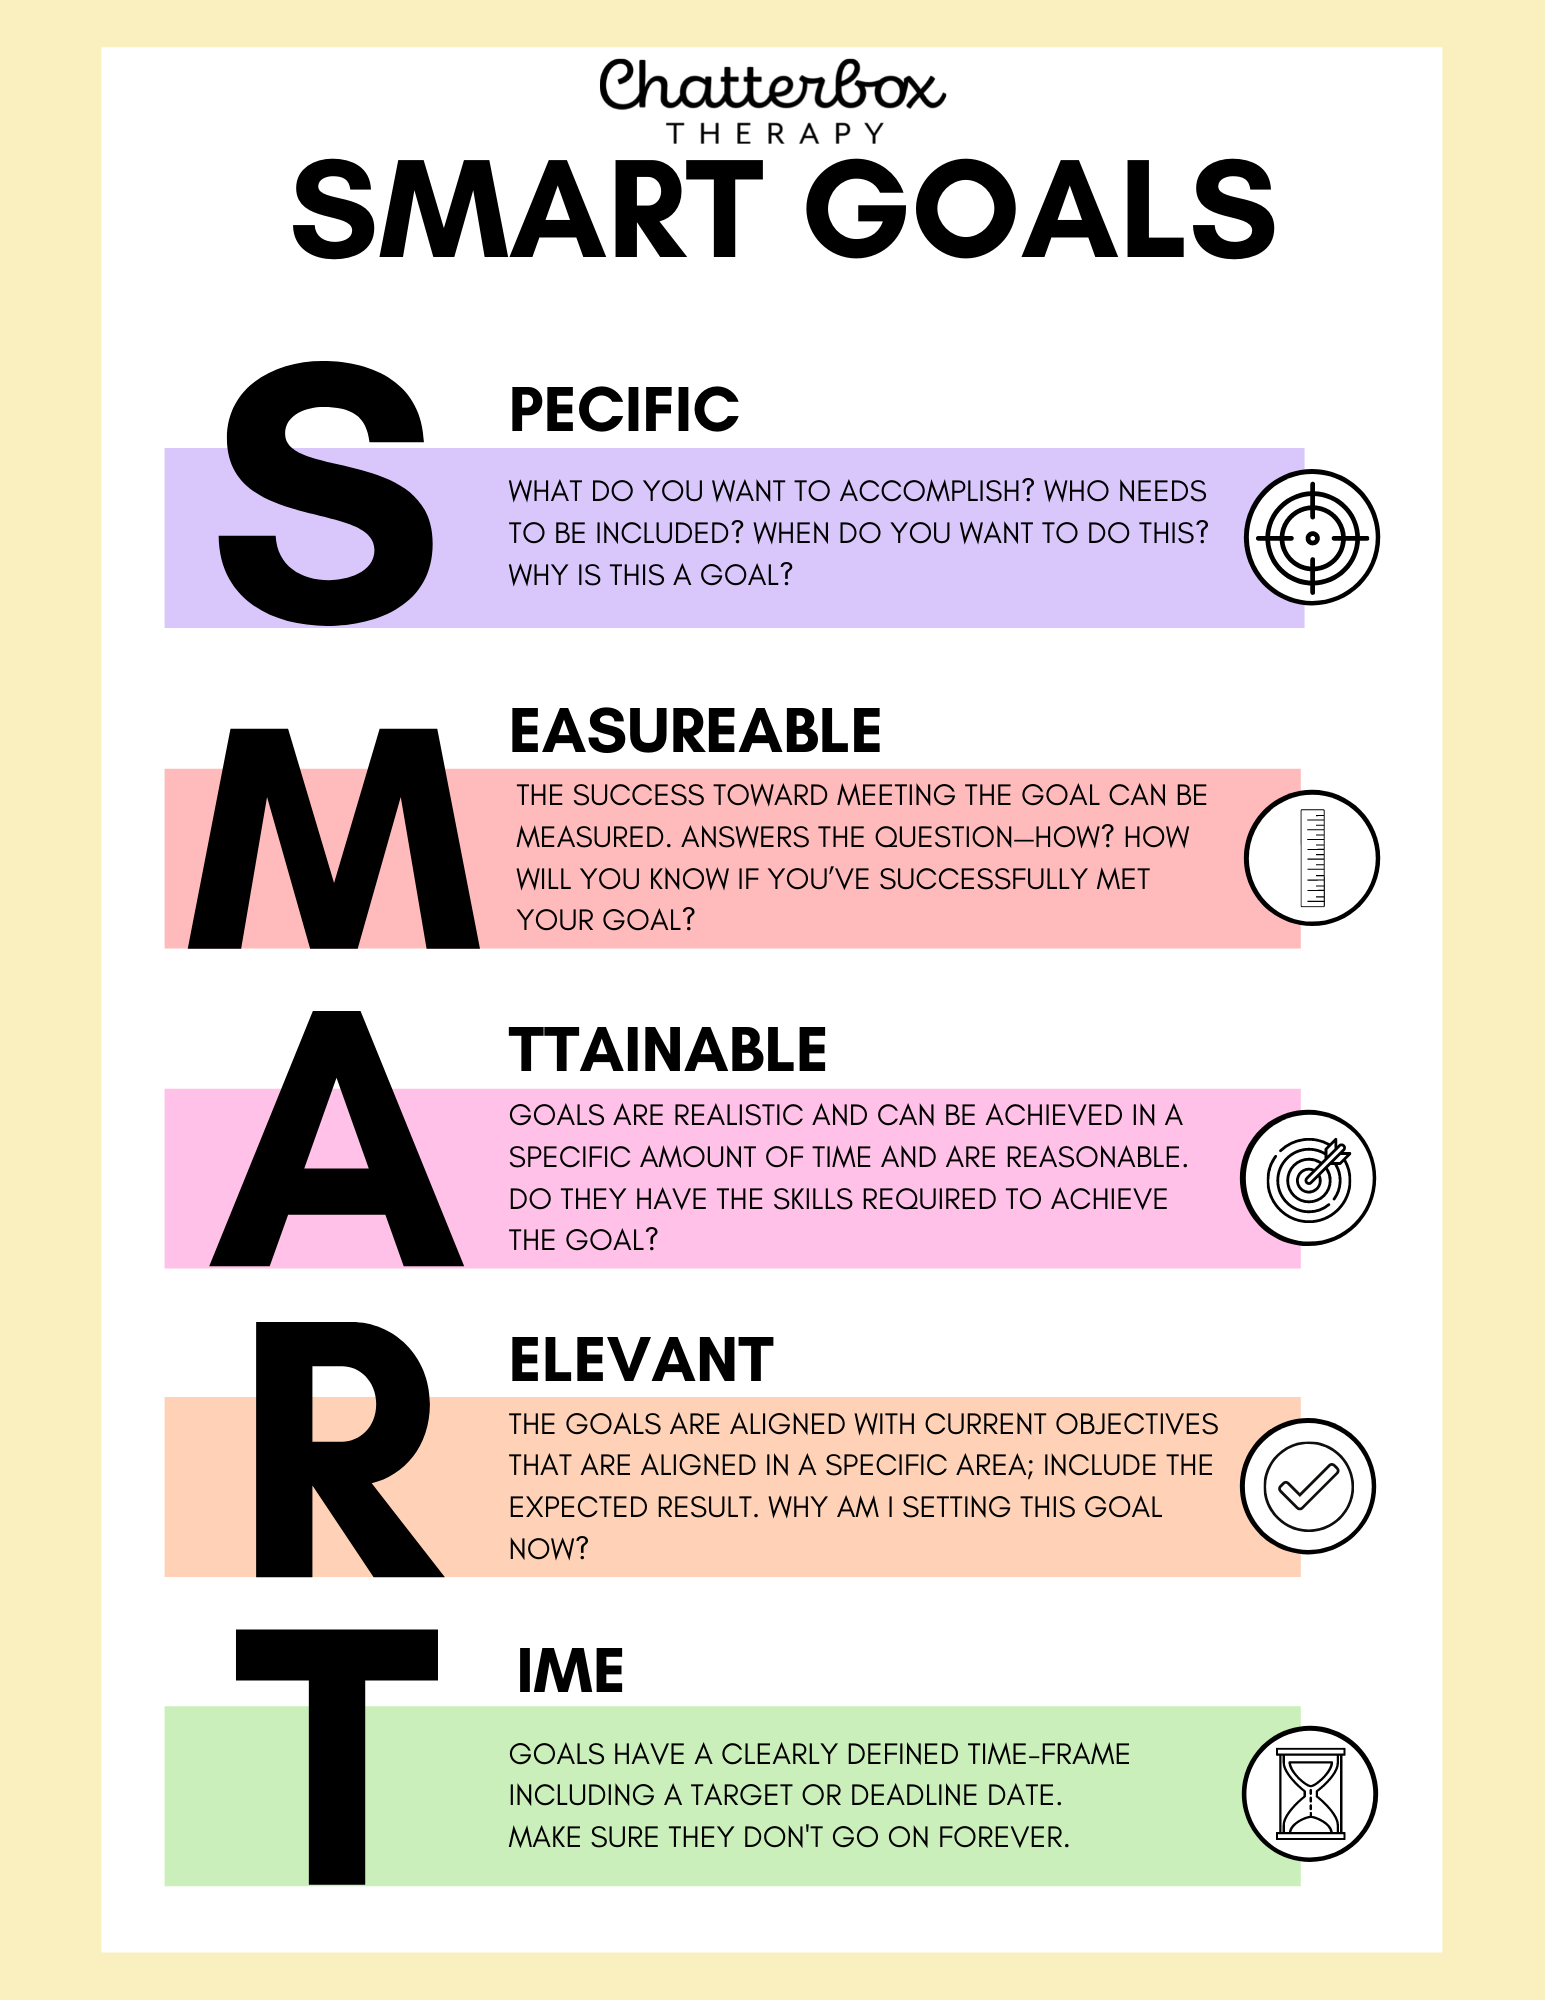 SMART goals for email marketing